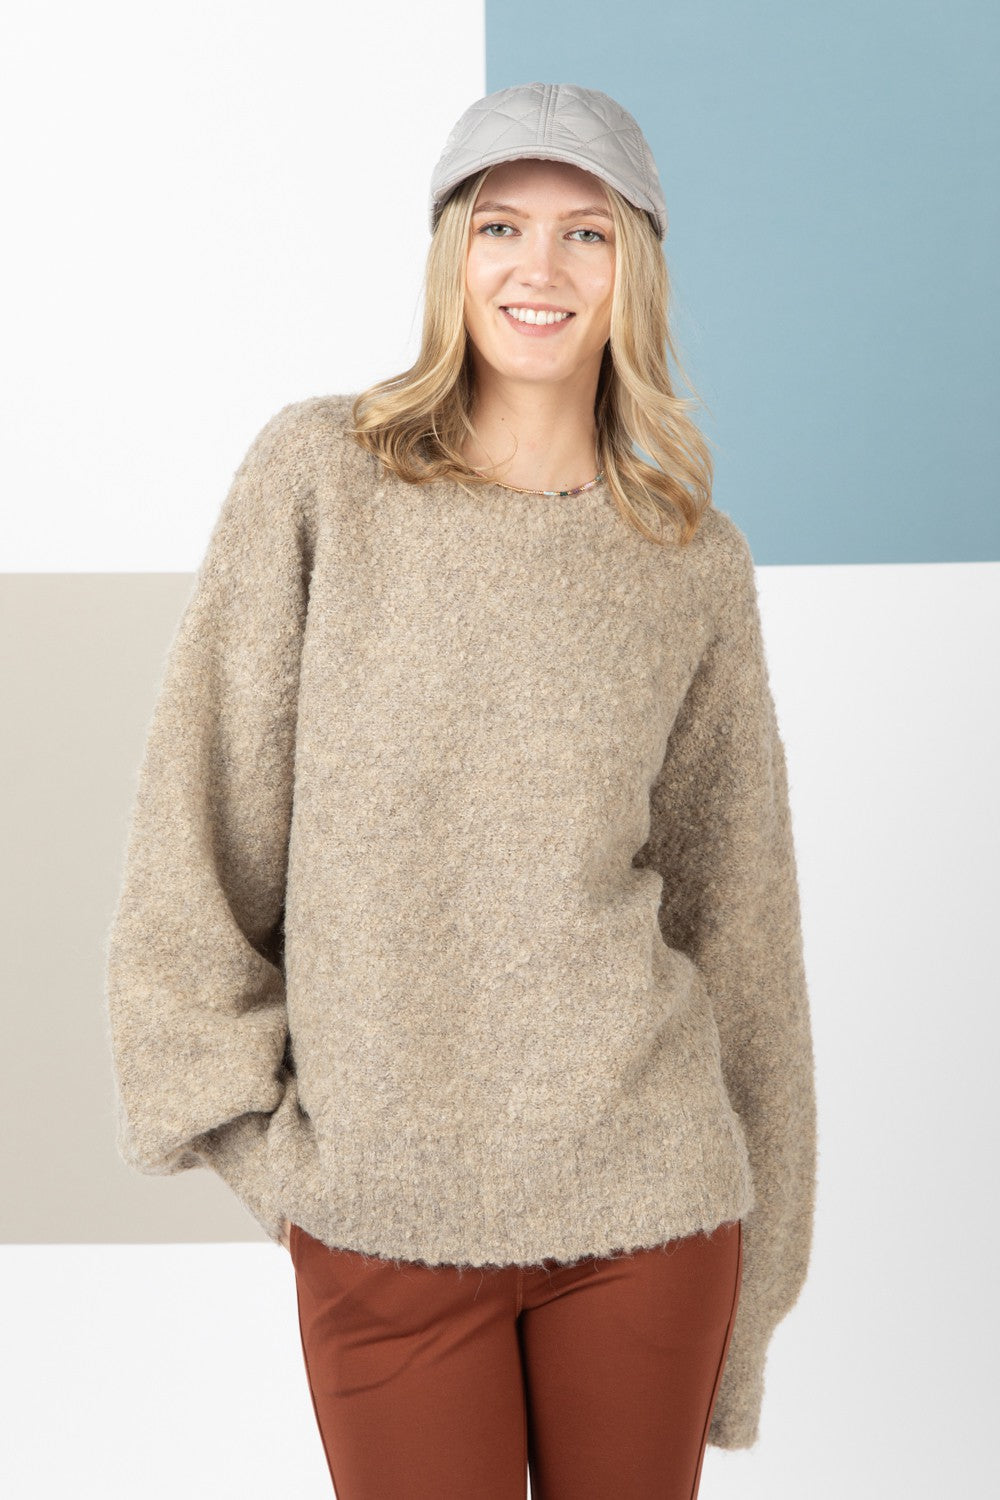 Cozy Fuzzy Knit Sweater-Tops-Anatomy Clothing Boutique in Brenham, Texas